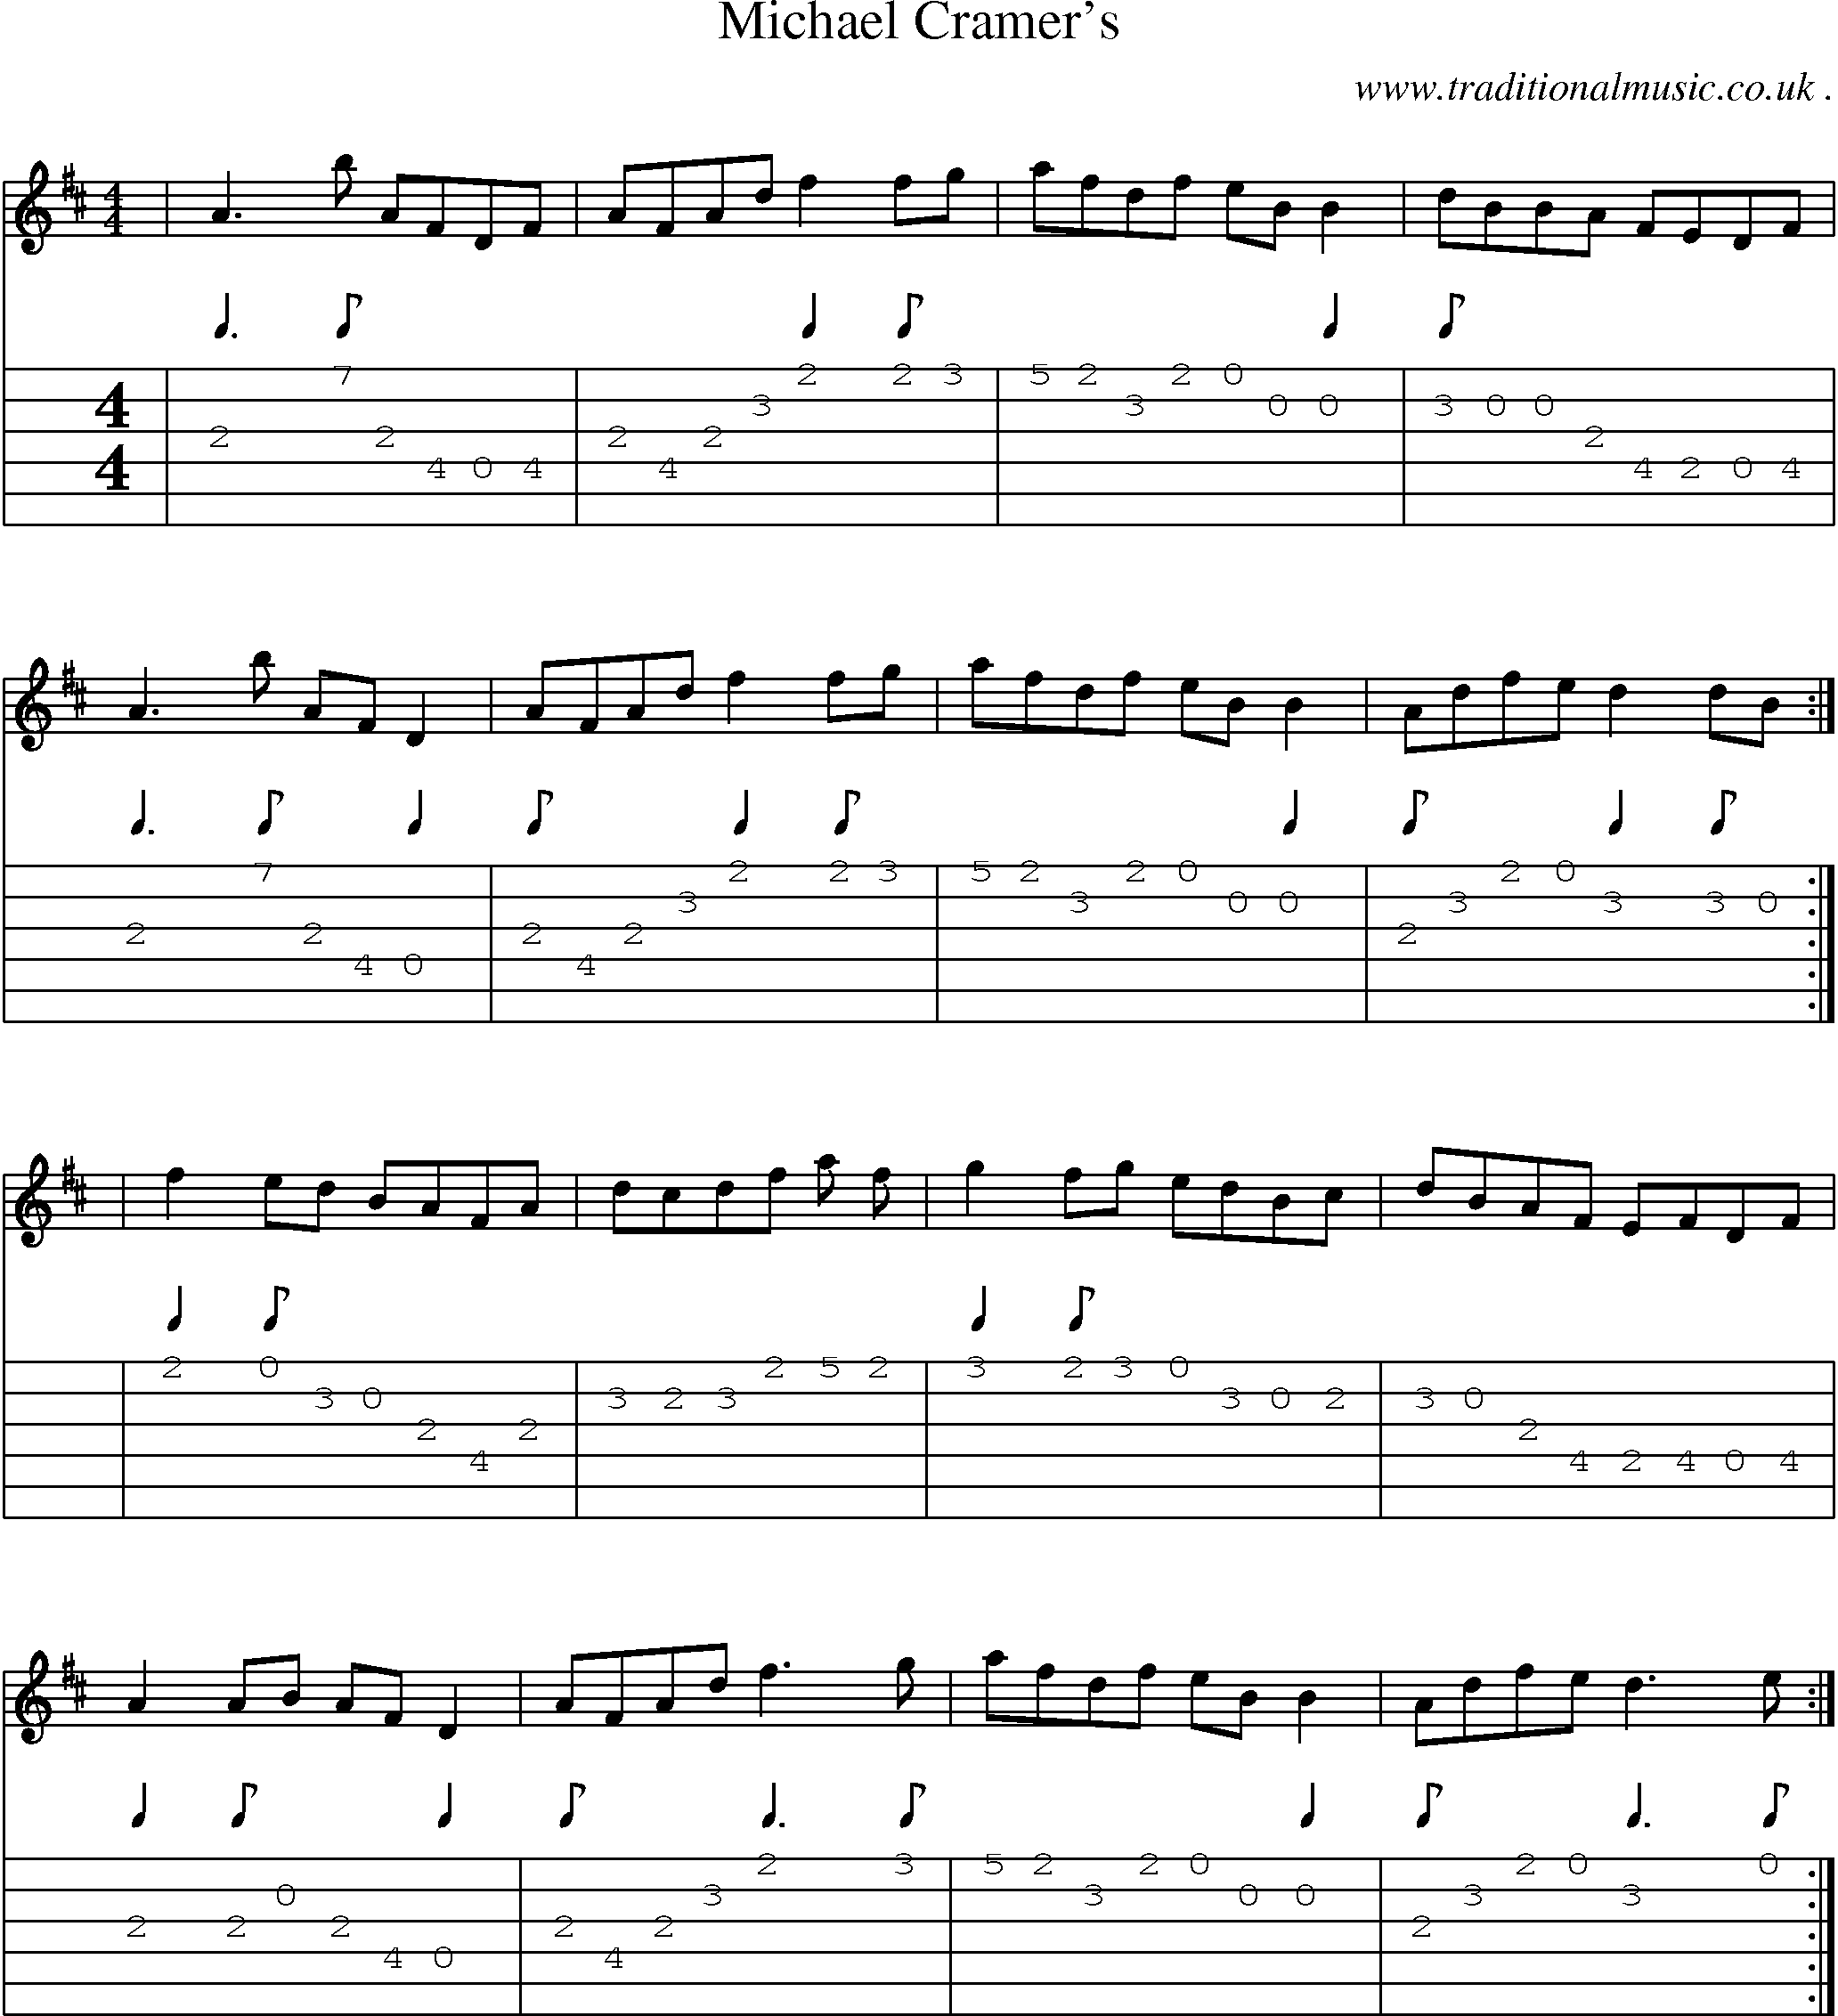 Sheet-Music and Guitar Tabs for Michael Cramers